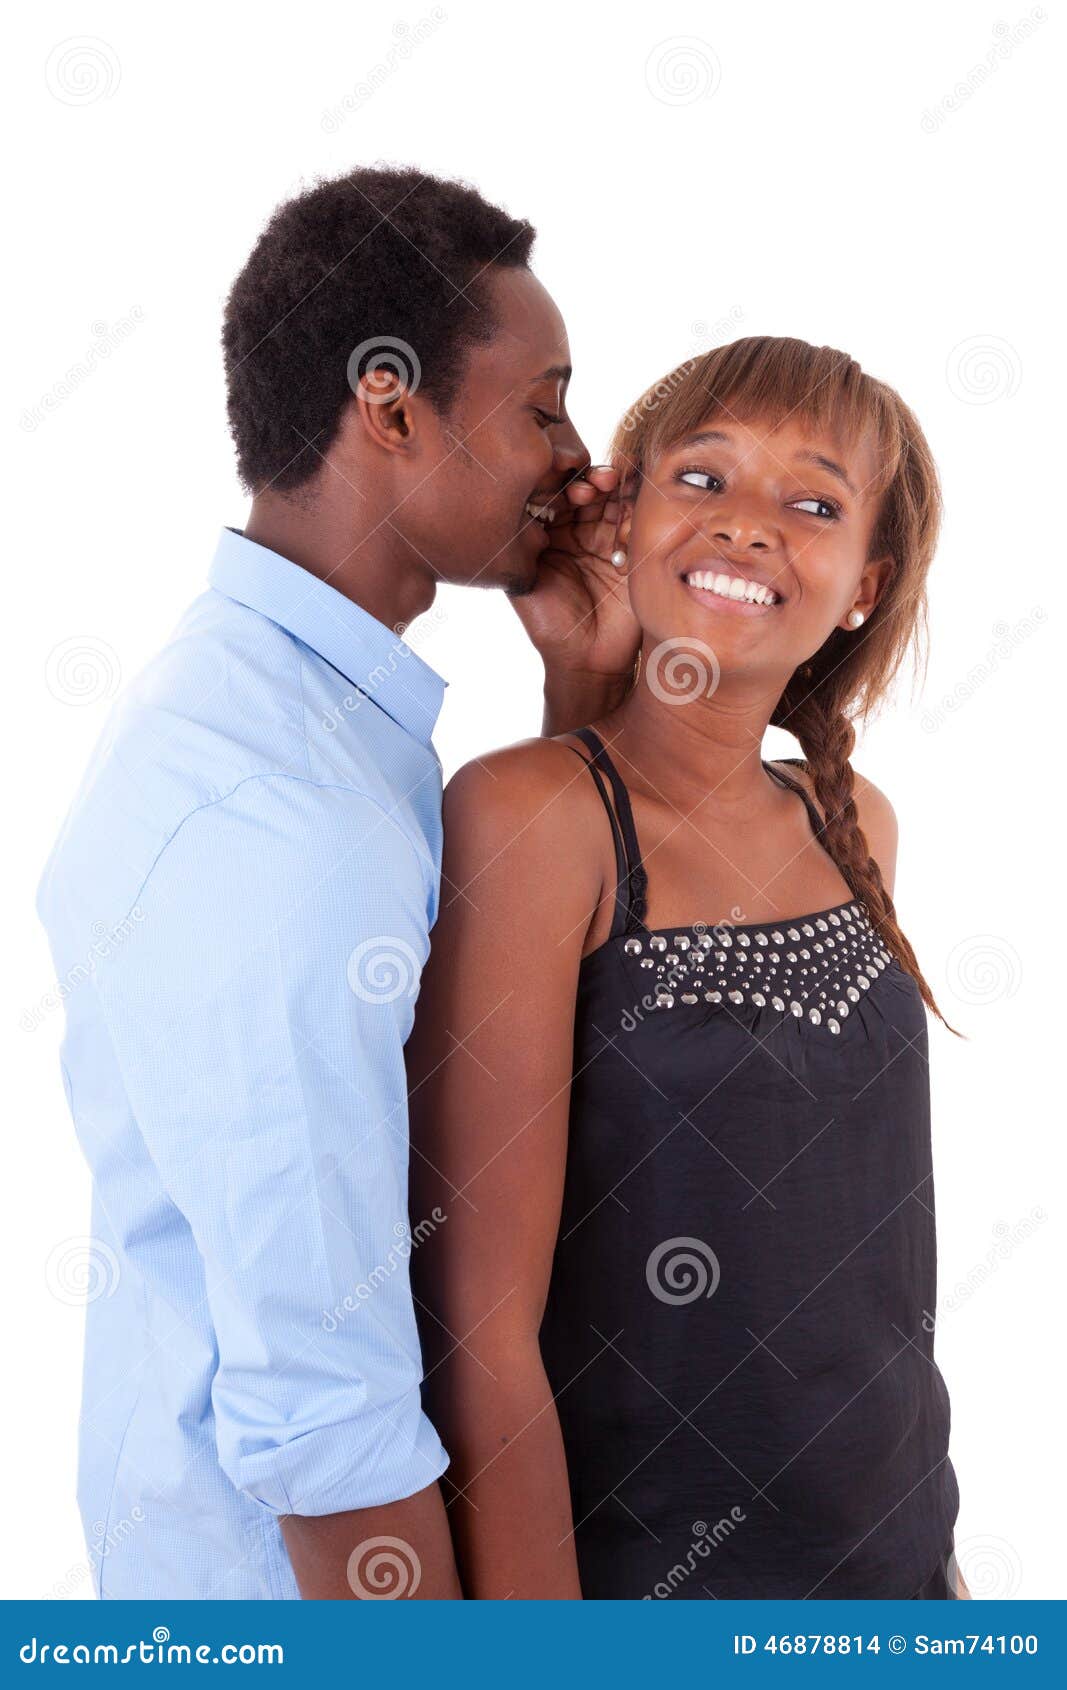 Sharing Secret. Black Guy Gossiping With His Excited Girlfriend